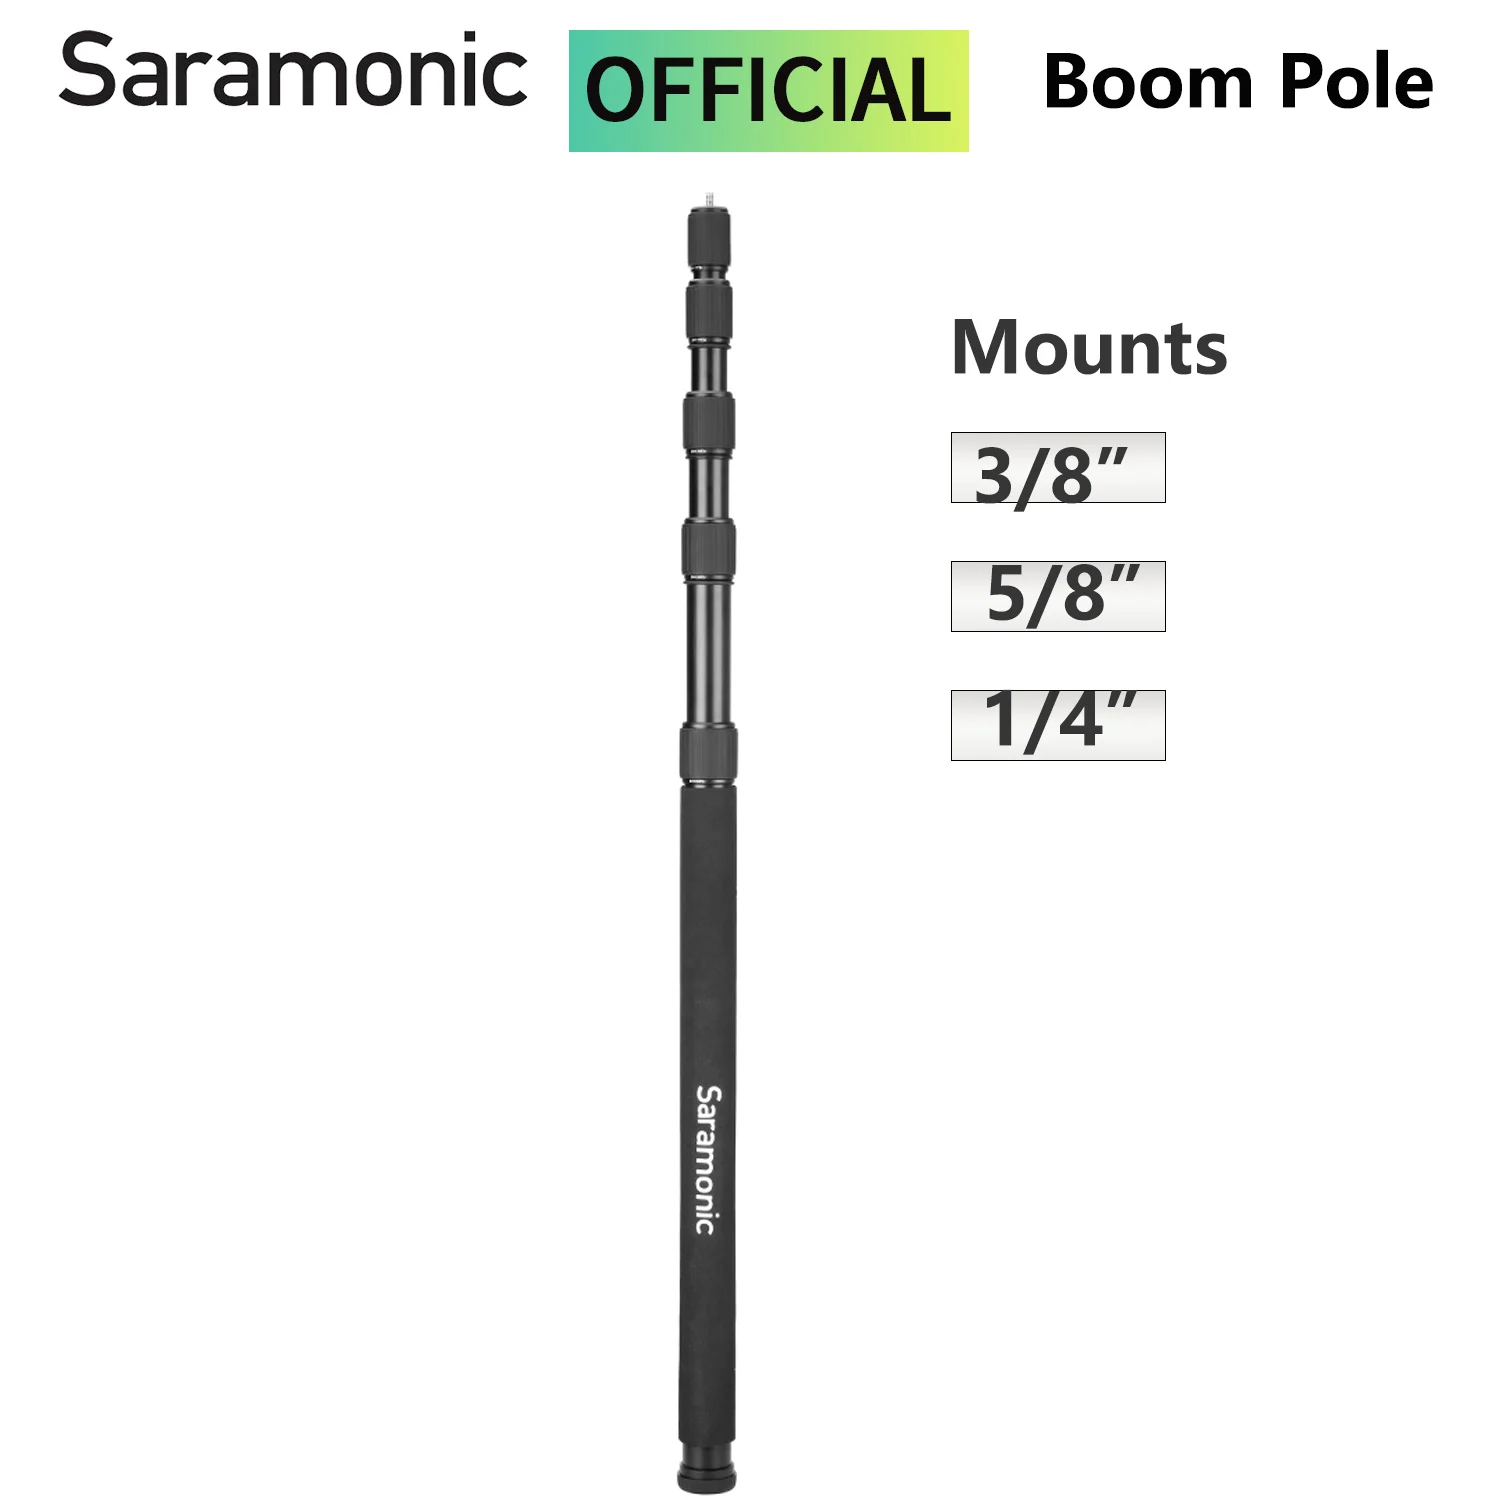 

Saramonic Aluminum Boom Pole in 5 Sections with 3/8” 1/4” and 5/8” Mounts for Microphone Stands Shock Mounts Blimp Film Making